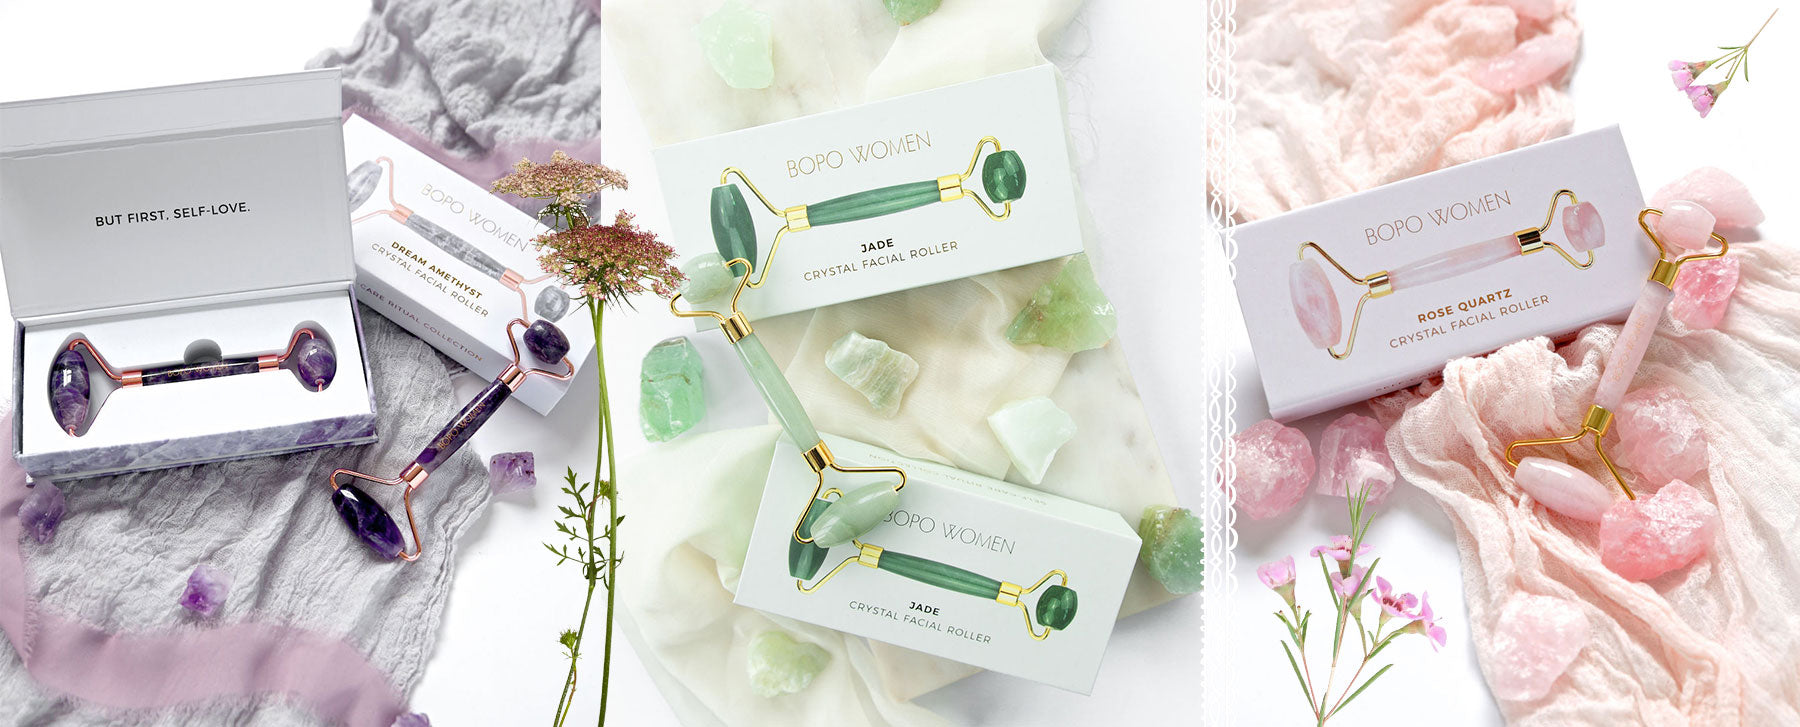 Beauty Tools - crystal rollers by Bopo Women at Bella Boheme